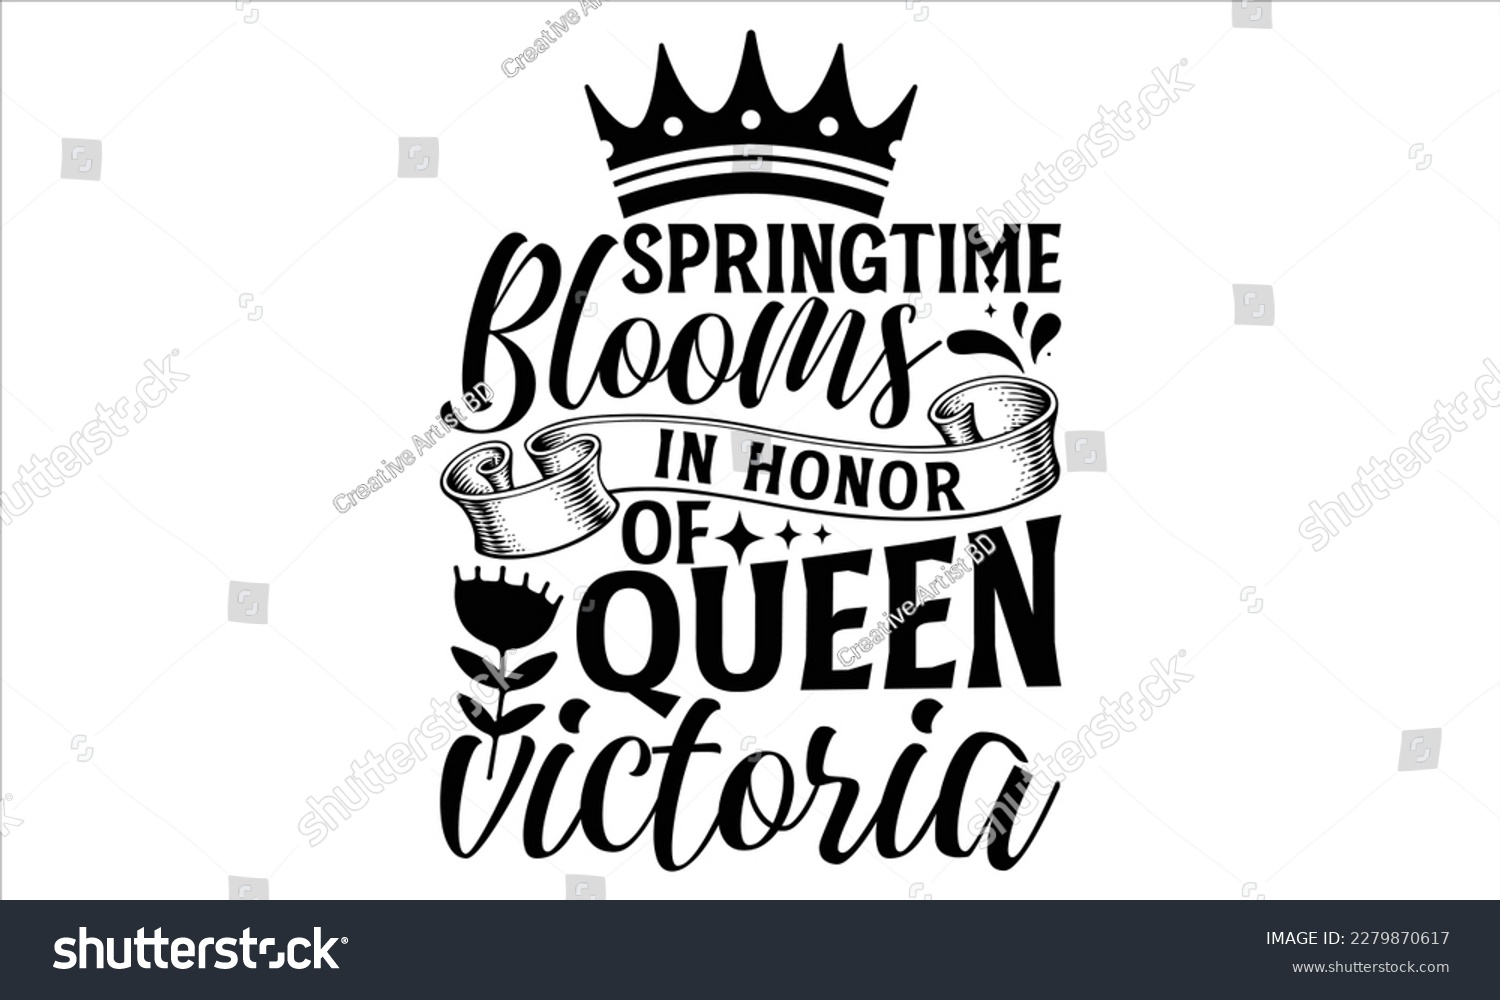 SVG of Springtime Blooms In Honor Of Queen Victoria - Victoria Day T Shirt Design, Vintage style, used for poster svg cut file, svg file, poster, banner, flyer and mug. svg